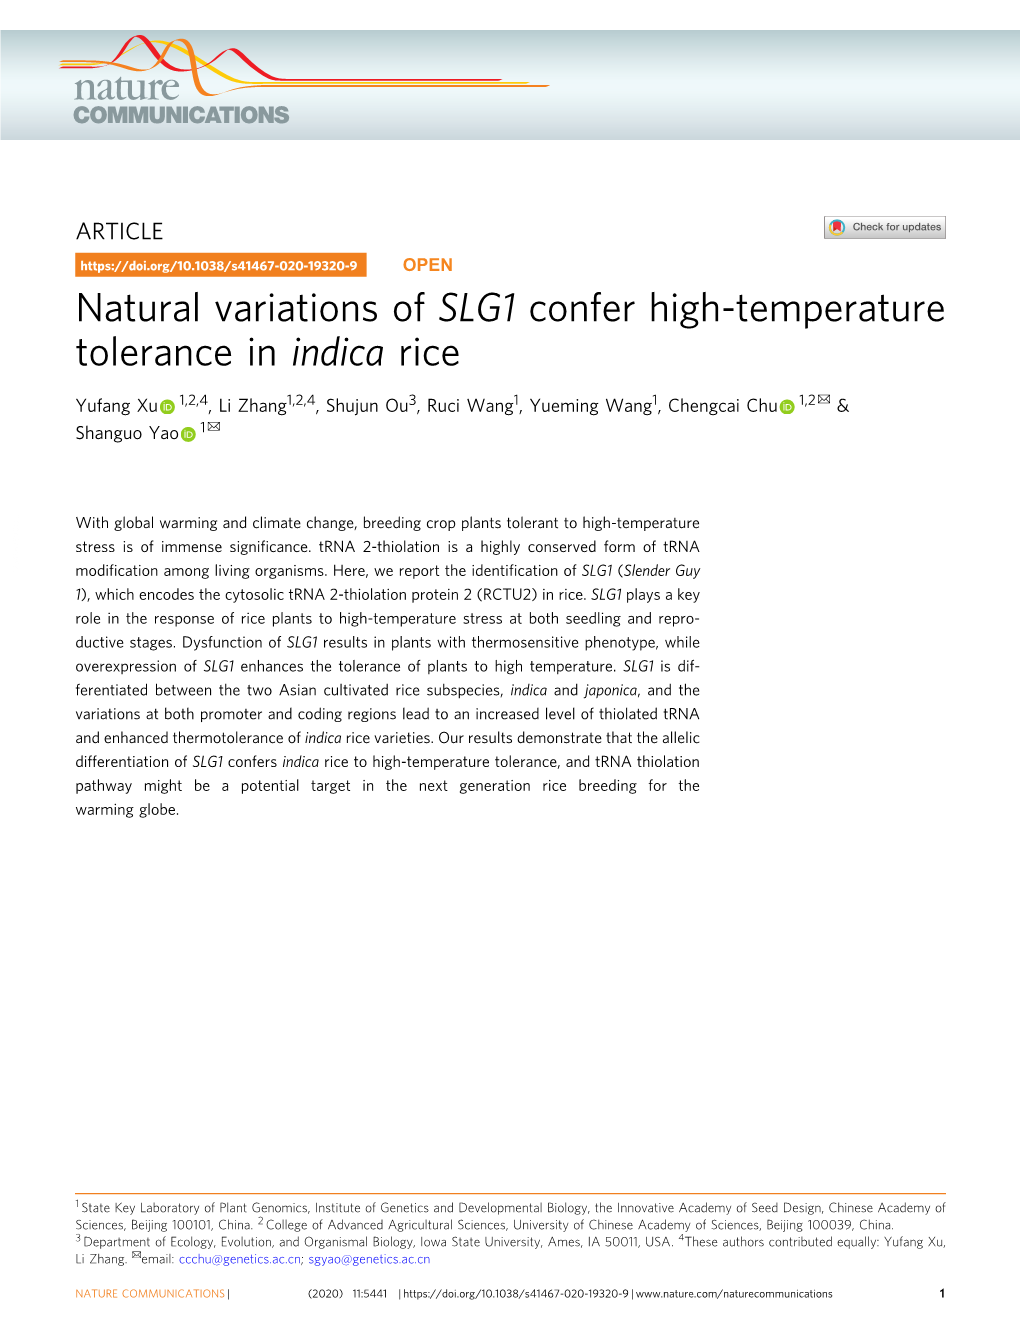 Natural Variations of SLG1 Confer High-Temperature Tolerance in Indica Rice